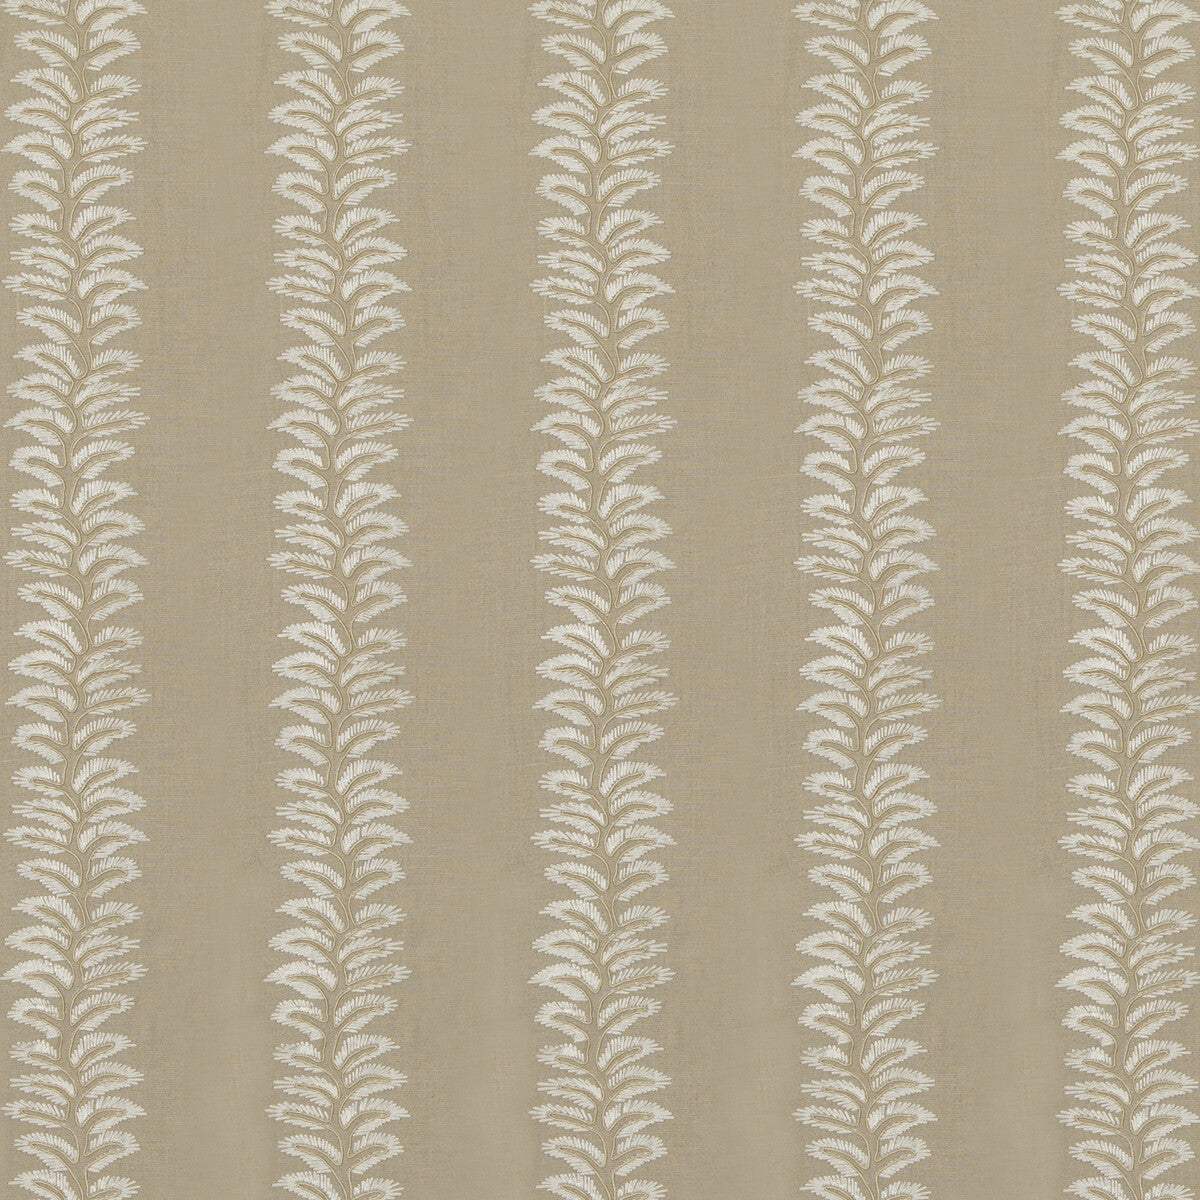 New Bradbourne fabric in linen color - pattern BF10946.110.0 - by G P &amp; J Baker in the Ashmore collection